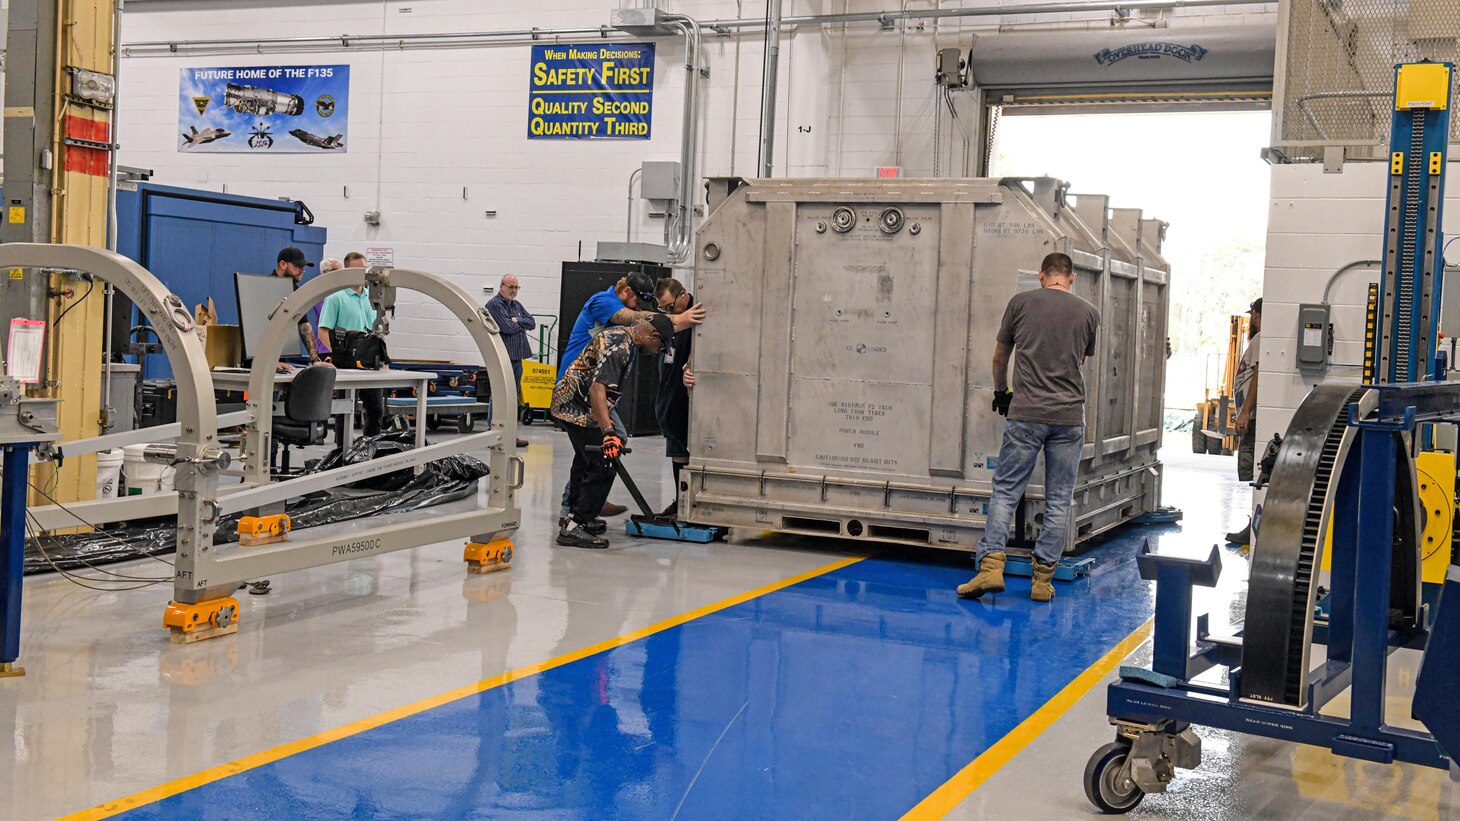 Fleet Readiness Center Southeast (FRCSE) recently received its first F135 Power Module (PM). The PM is one of the five major modules that make up the propulsion system that powers the F-35 Lightning II Joint Strike Fighter.